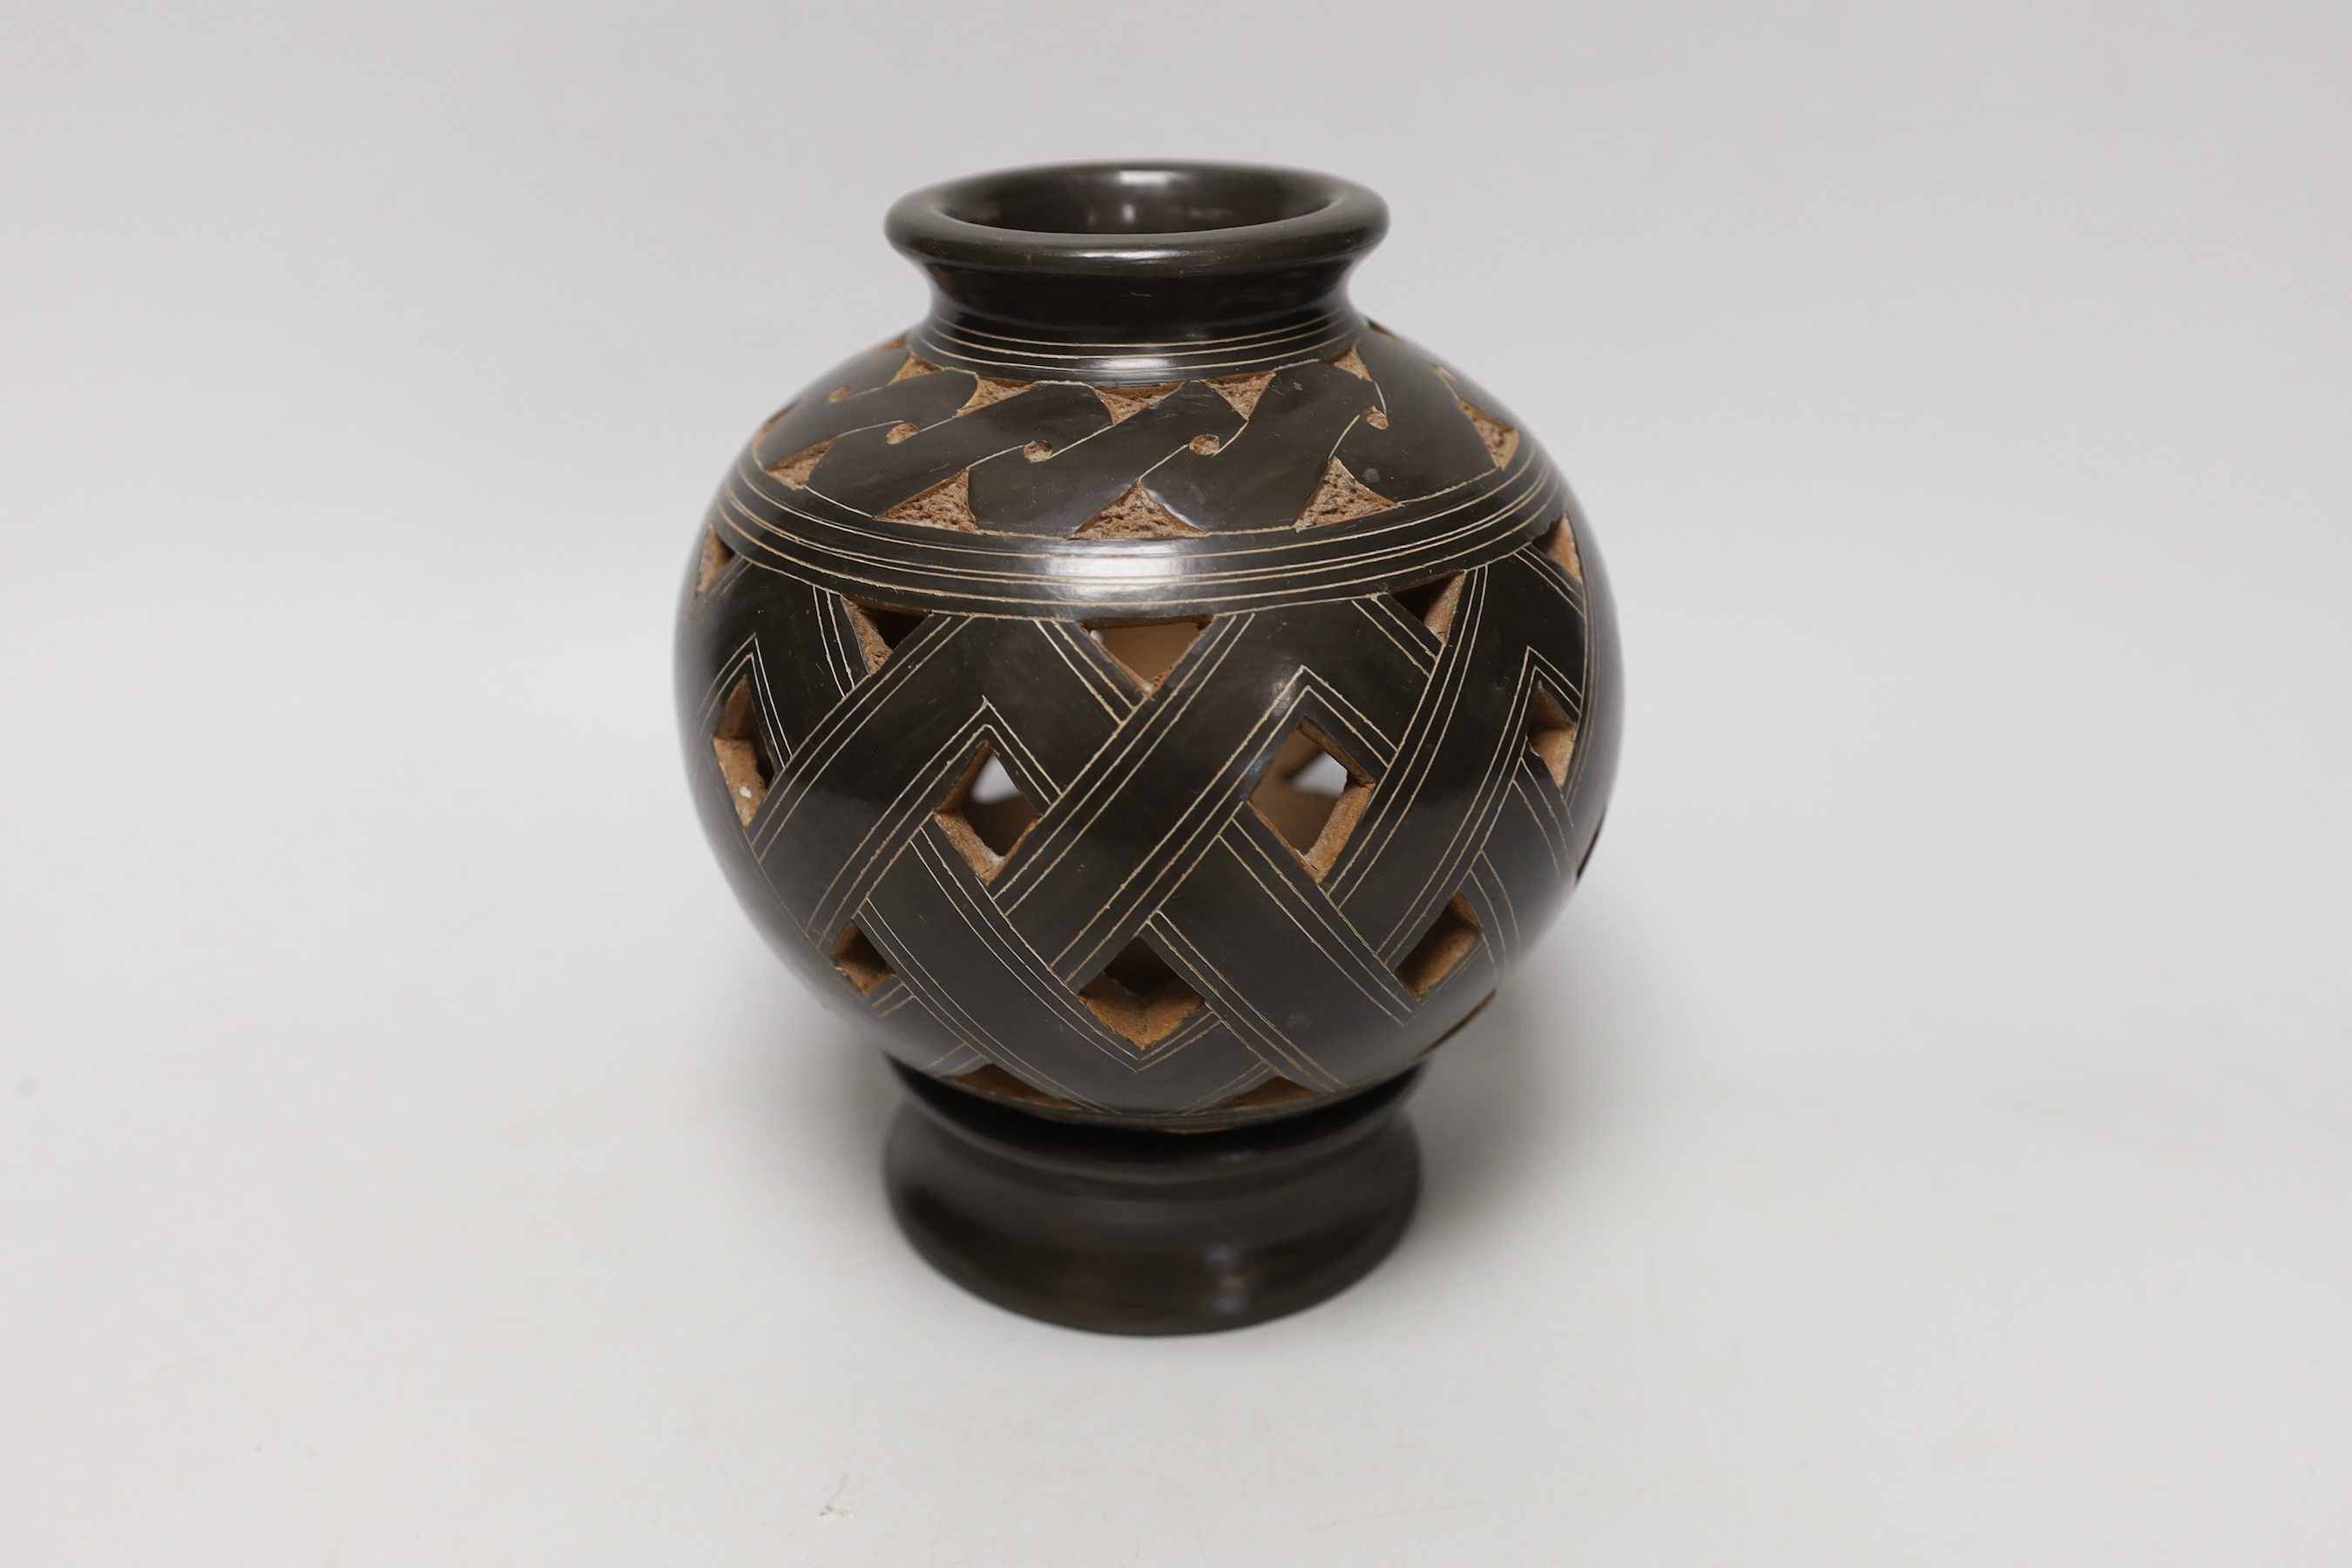 A Nicaraguan studio pottery vase and matching stand, signed on base of vase Roger Calero, 17cm high including stand